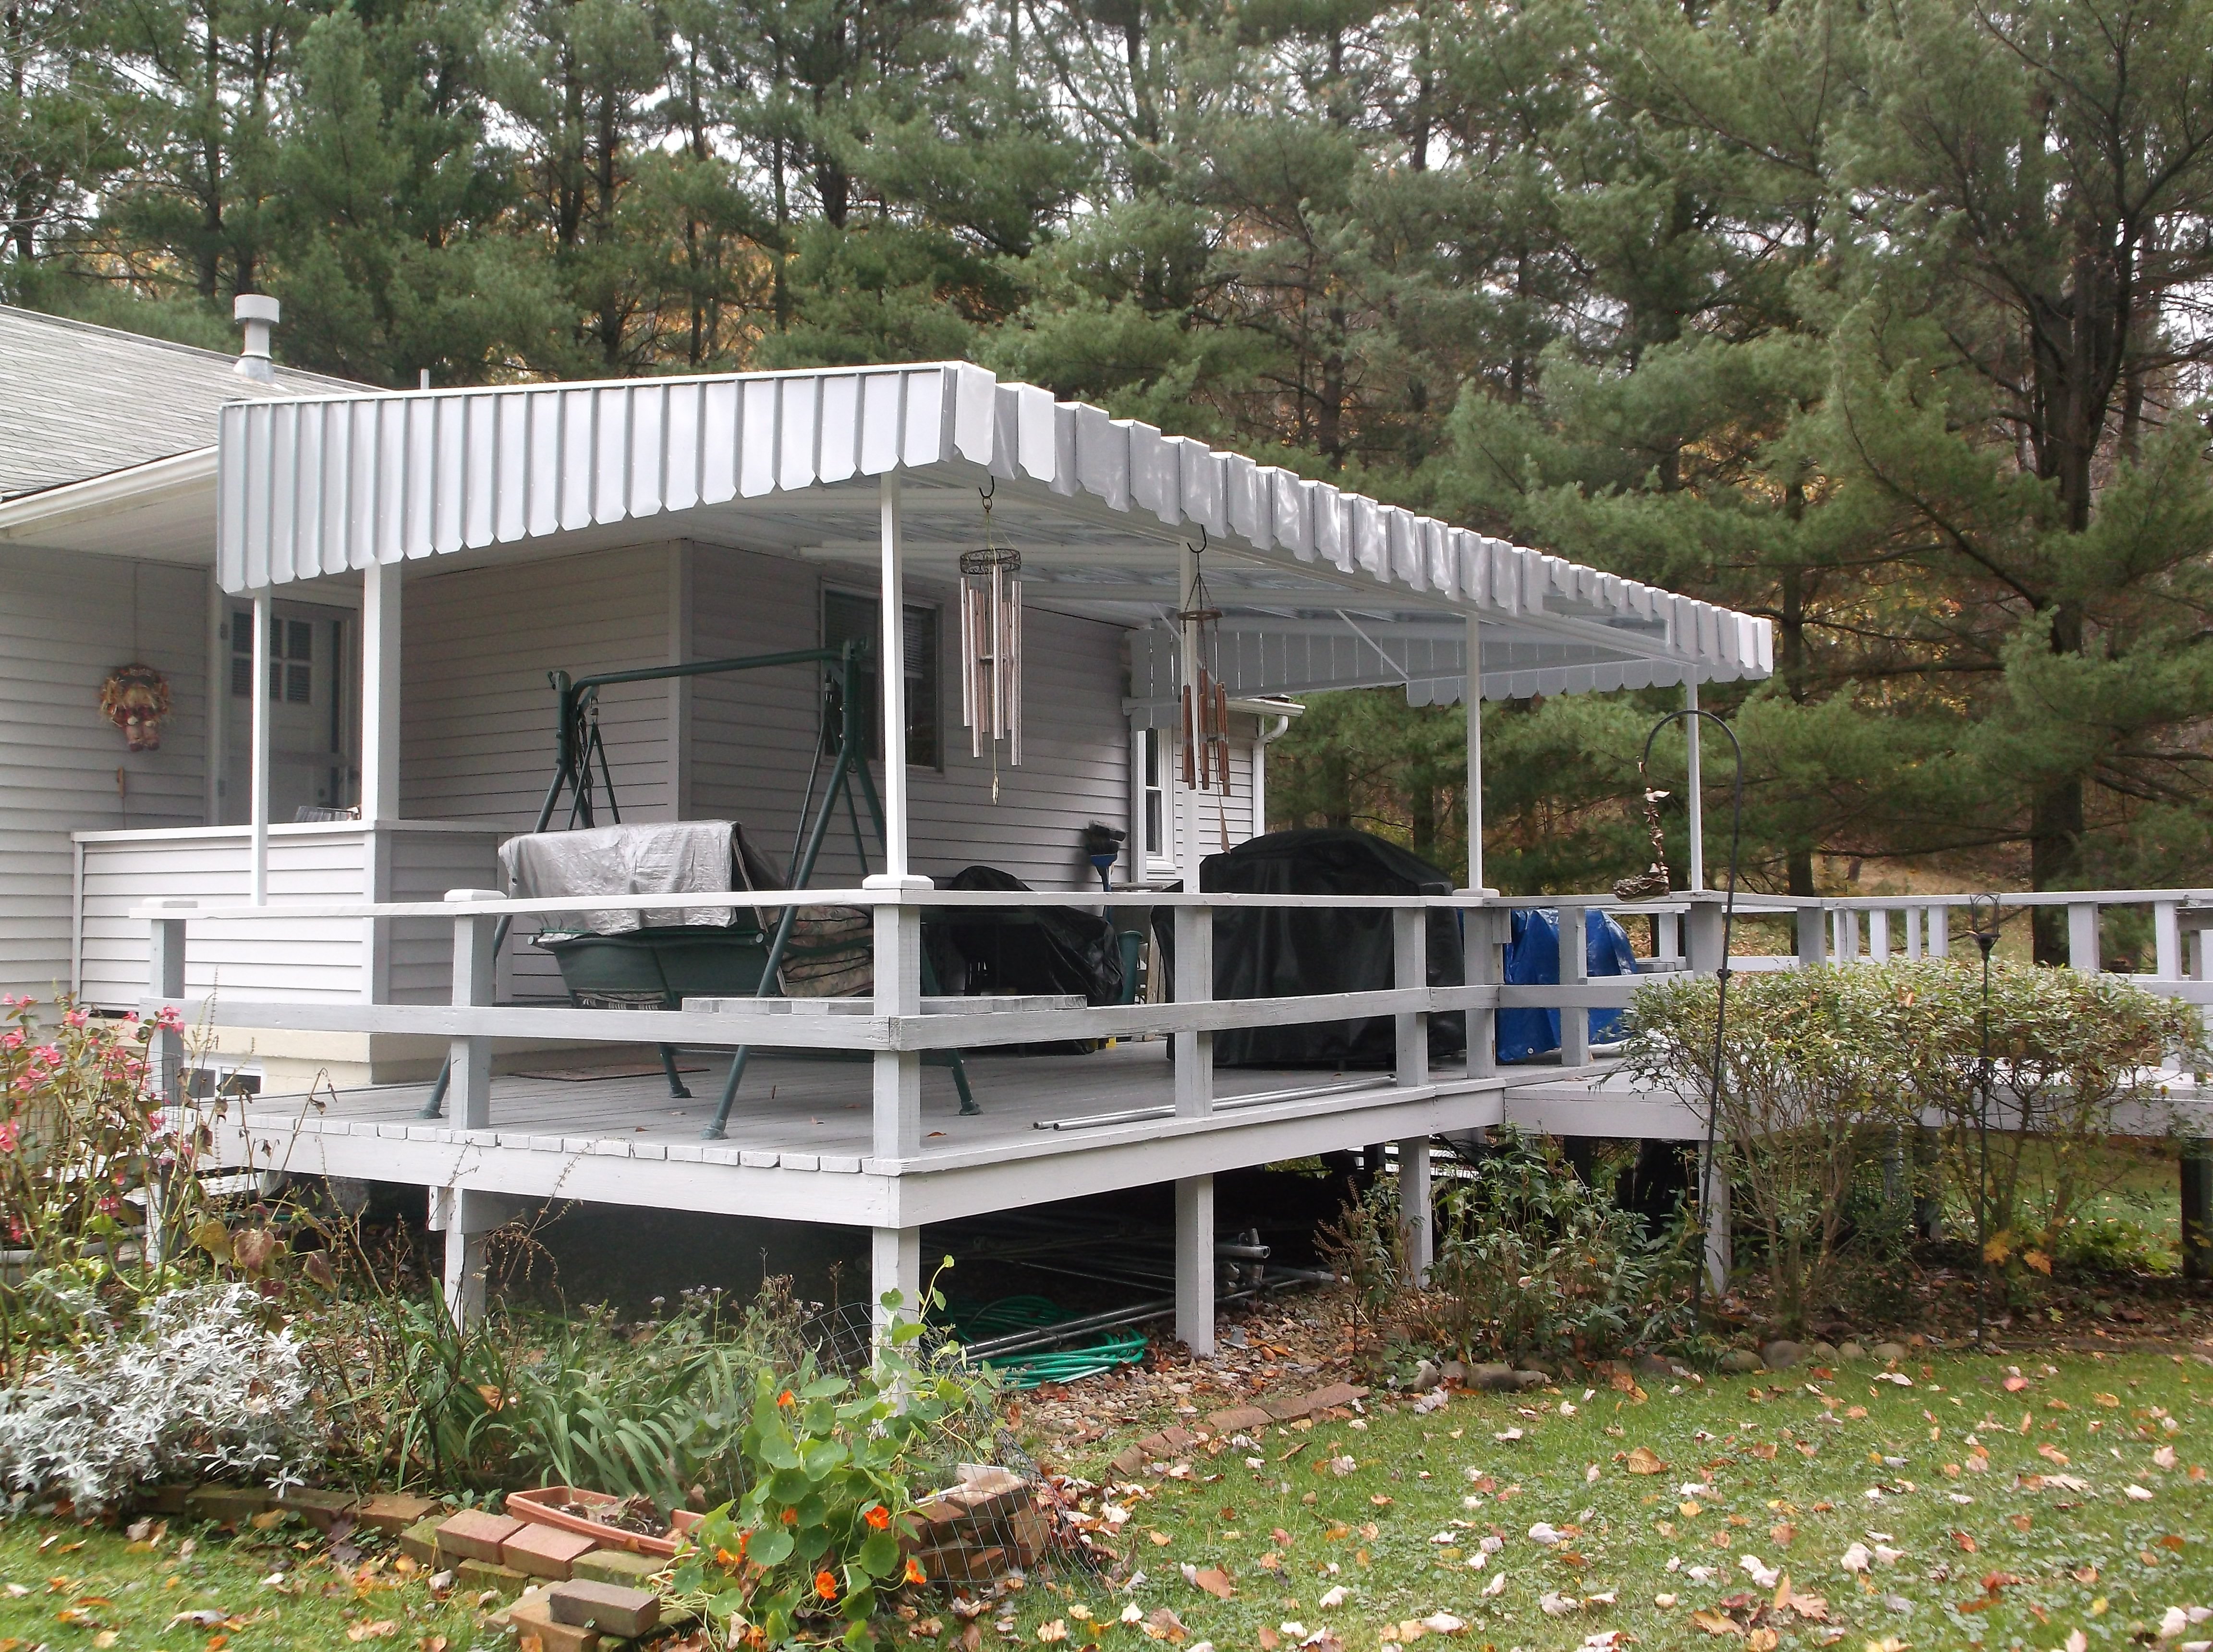 Aluminum Awning In Pittsburgh Canvas Awnings